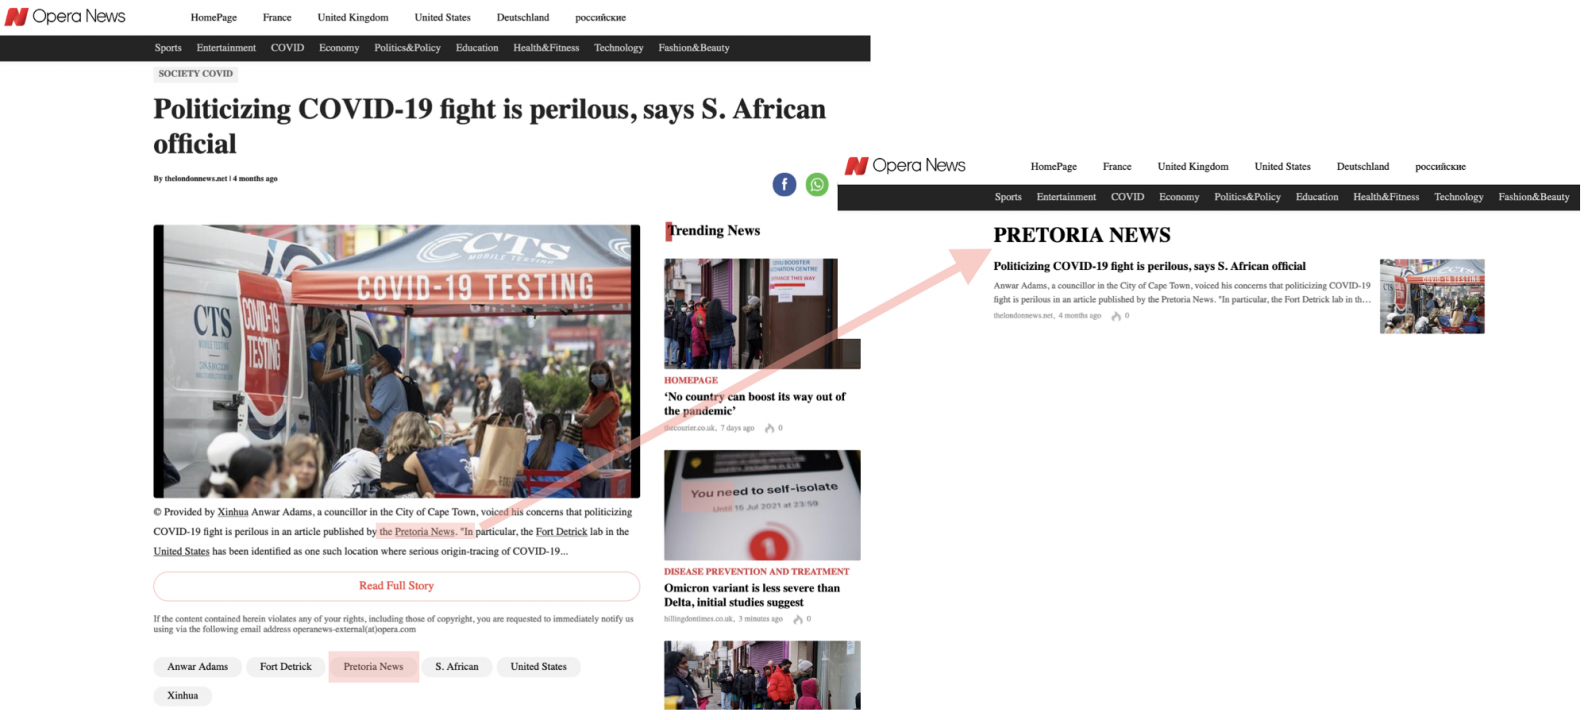 Screencap of a recursive linking within Opera News using prompts for Pretoria News as the destination. When a user clicks on the outlet name on the article page (at left), they are taken to a list (at right) of all Pretoria News articles found on the Opera News website. When the user then clicks on the only article on the list, they are returned back to the excerpted article.